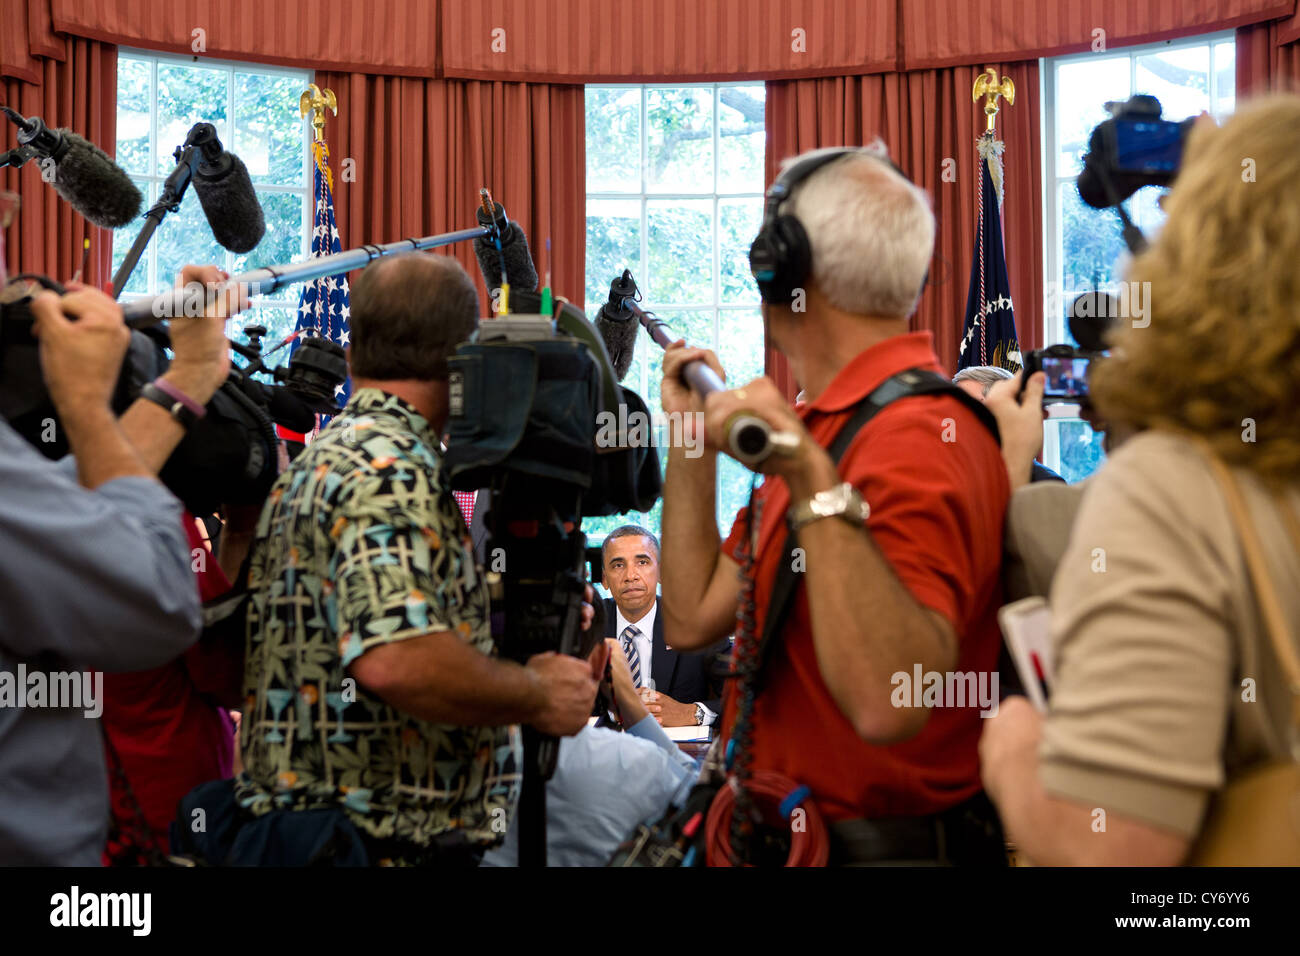 Members of the press document President Barack Obama during the Honoring America's Veterans and Caring for Camp Lejeune Families Act of 2012 signing ceremony August 6, 2012 in the Oval Office of the White House. Stock Photo